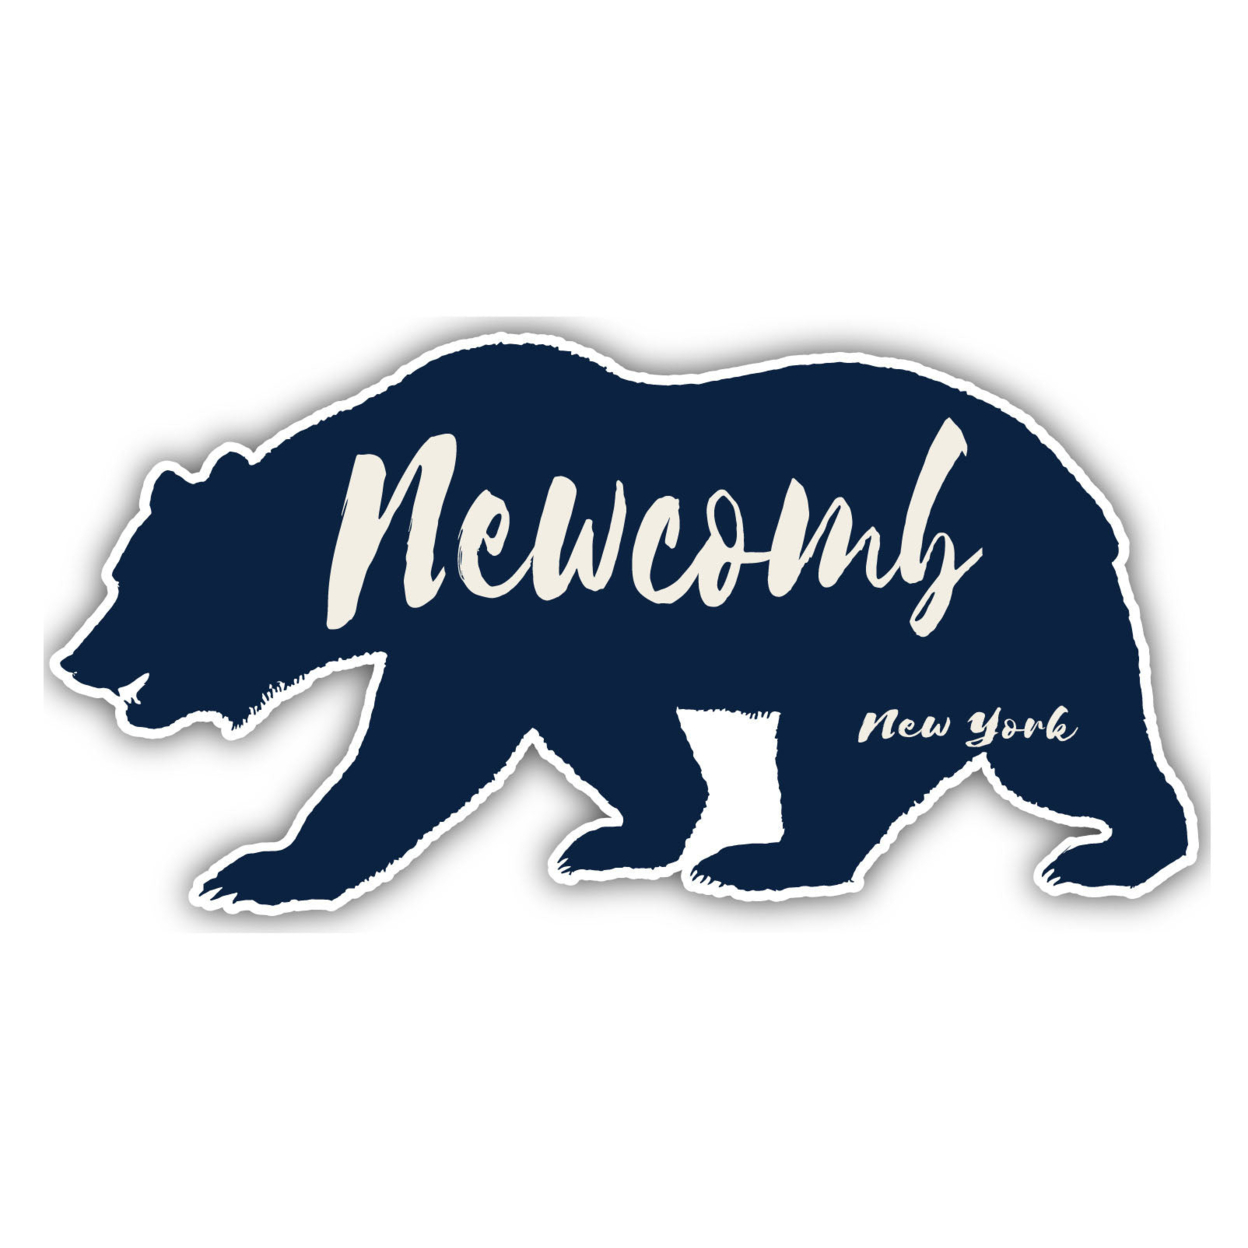 Newcomb New York Souvenir Decorative Stickers (Choose Theme And Size) - Single Unit, 2-Inch, Bear